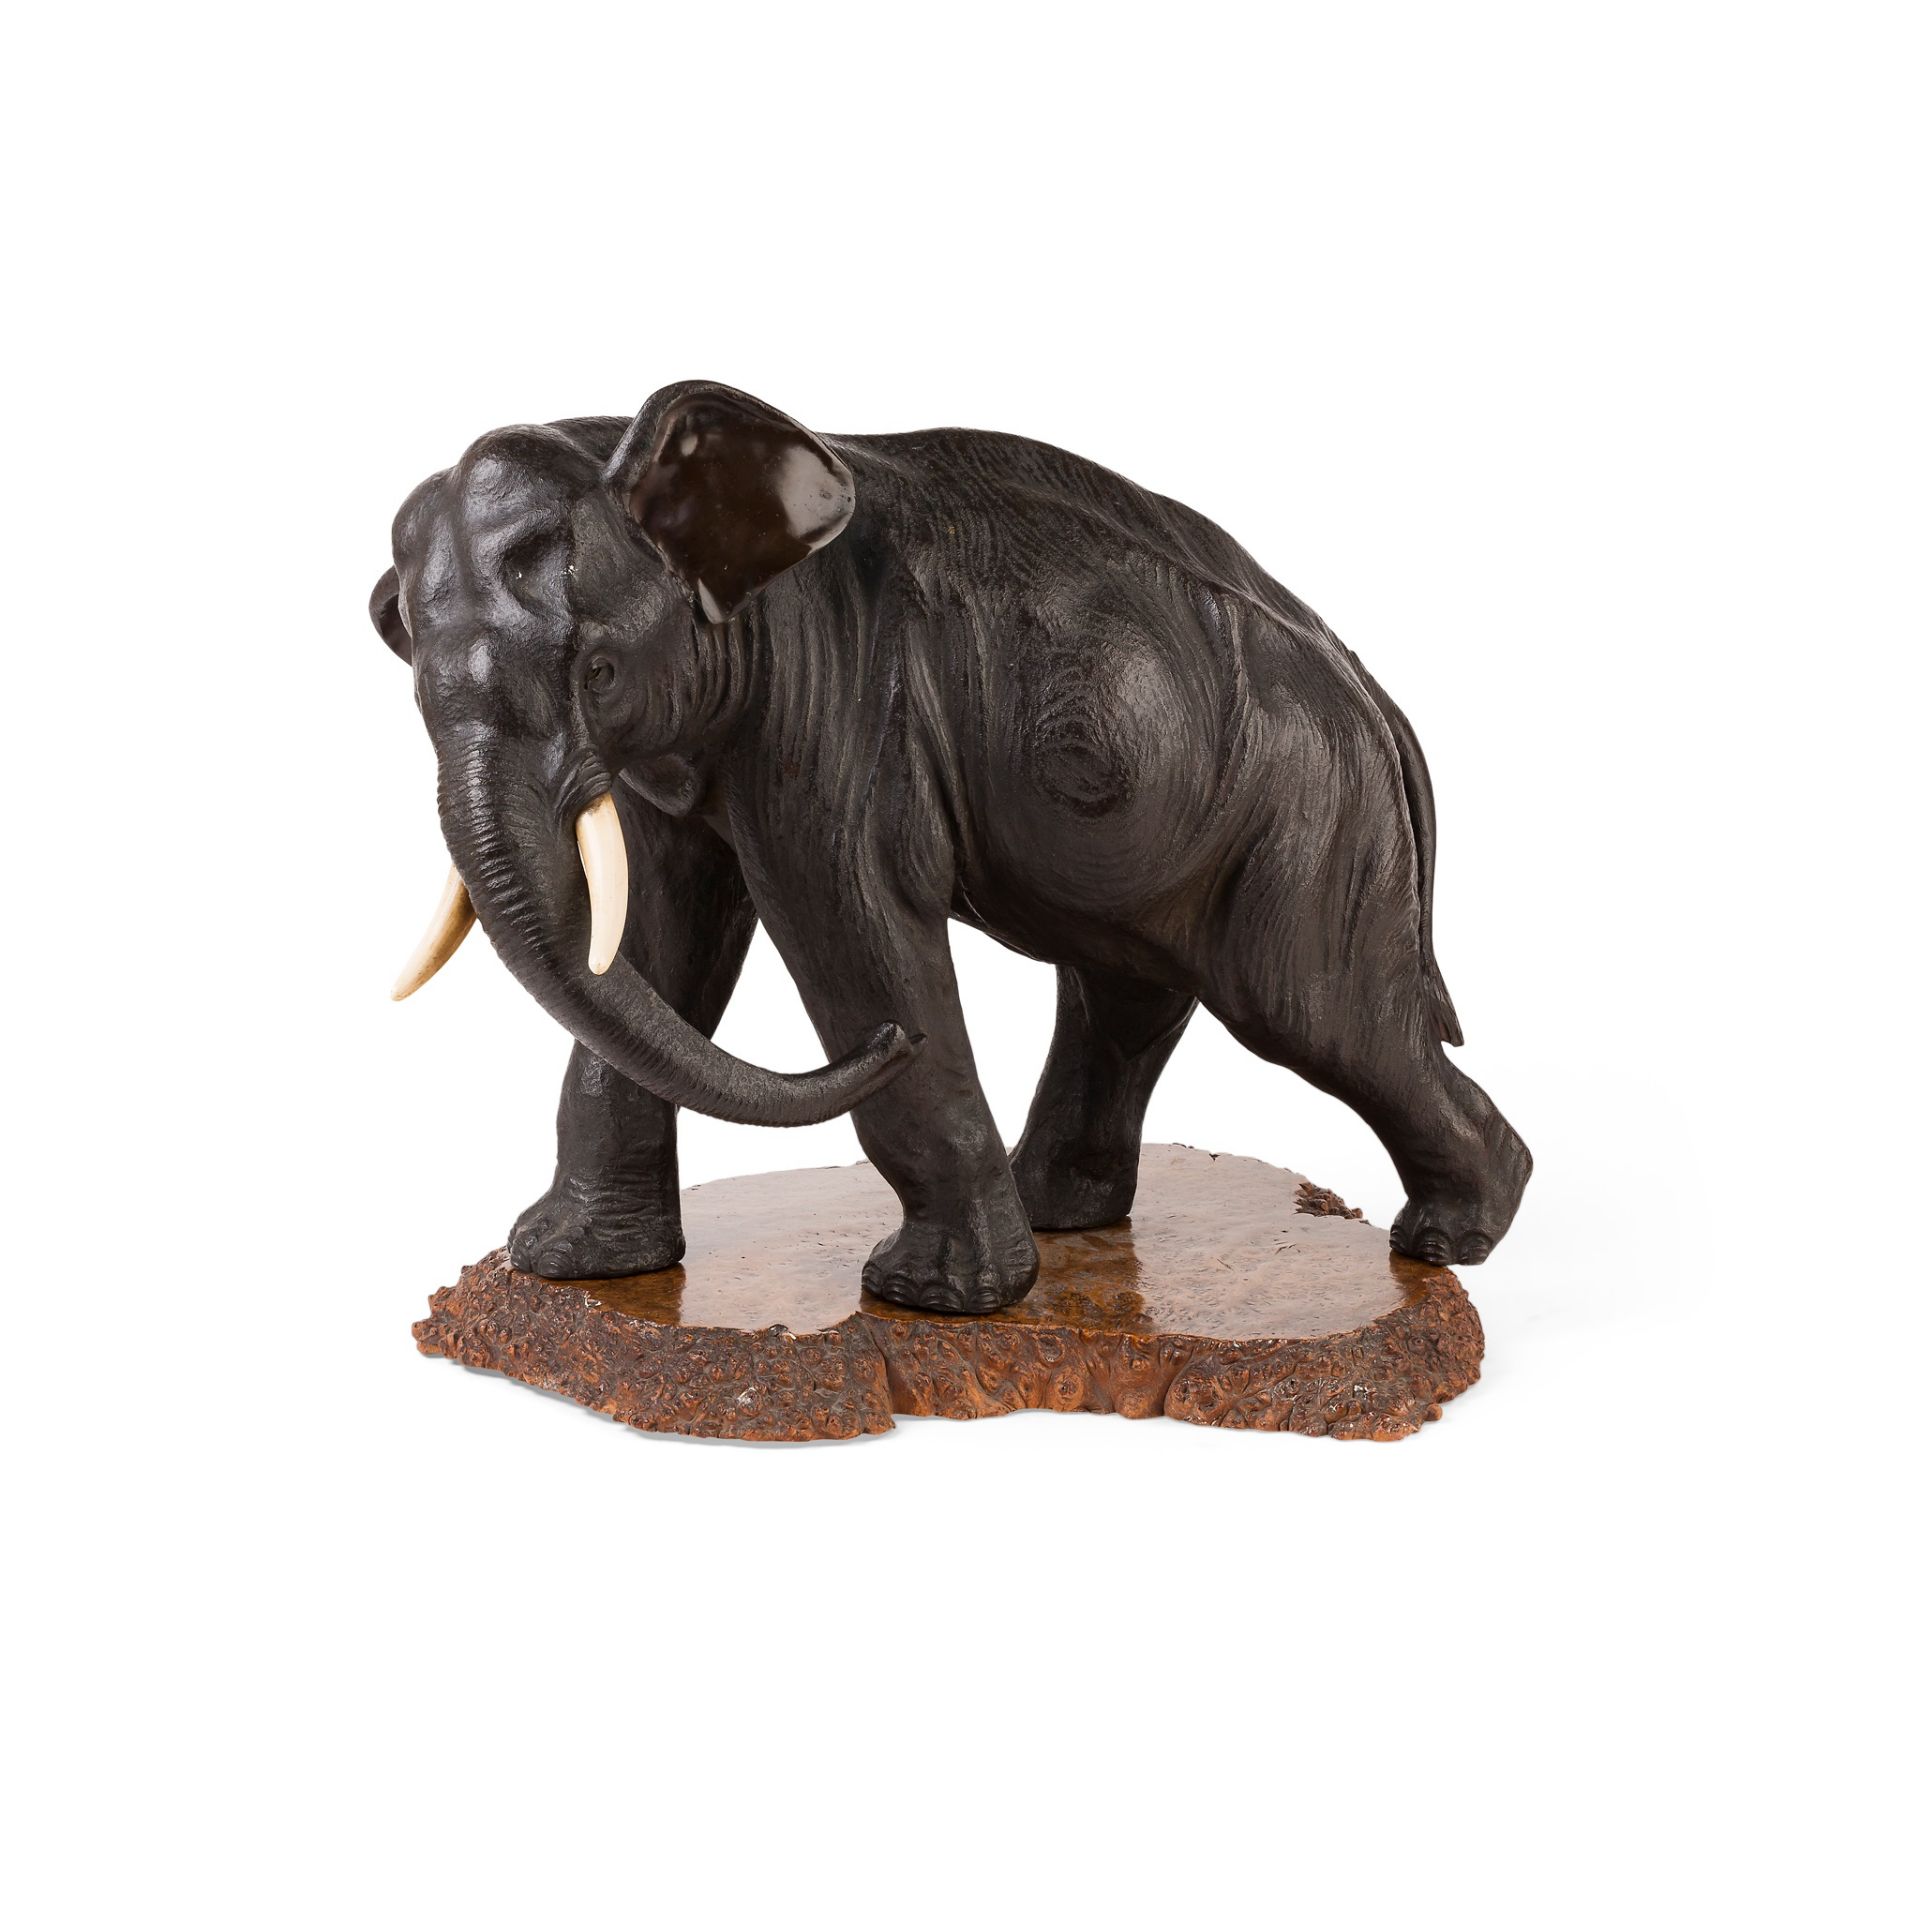 Y LARGE JAPANESE BRONZE AND IVORY FIGURE OF AN ELEPHANT MEIJI PERIOD, LATE 19TH CENTURY